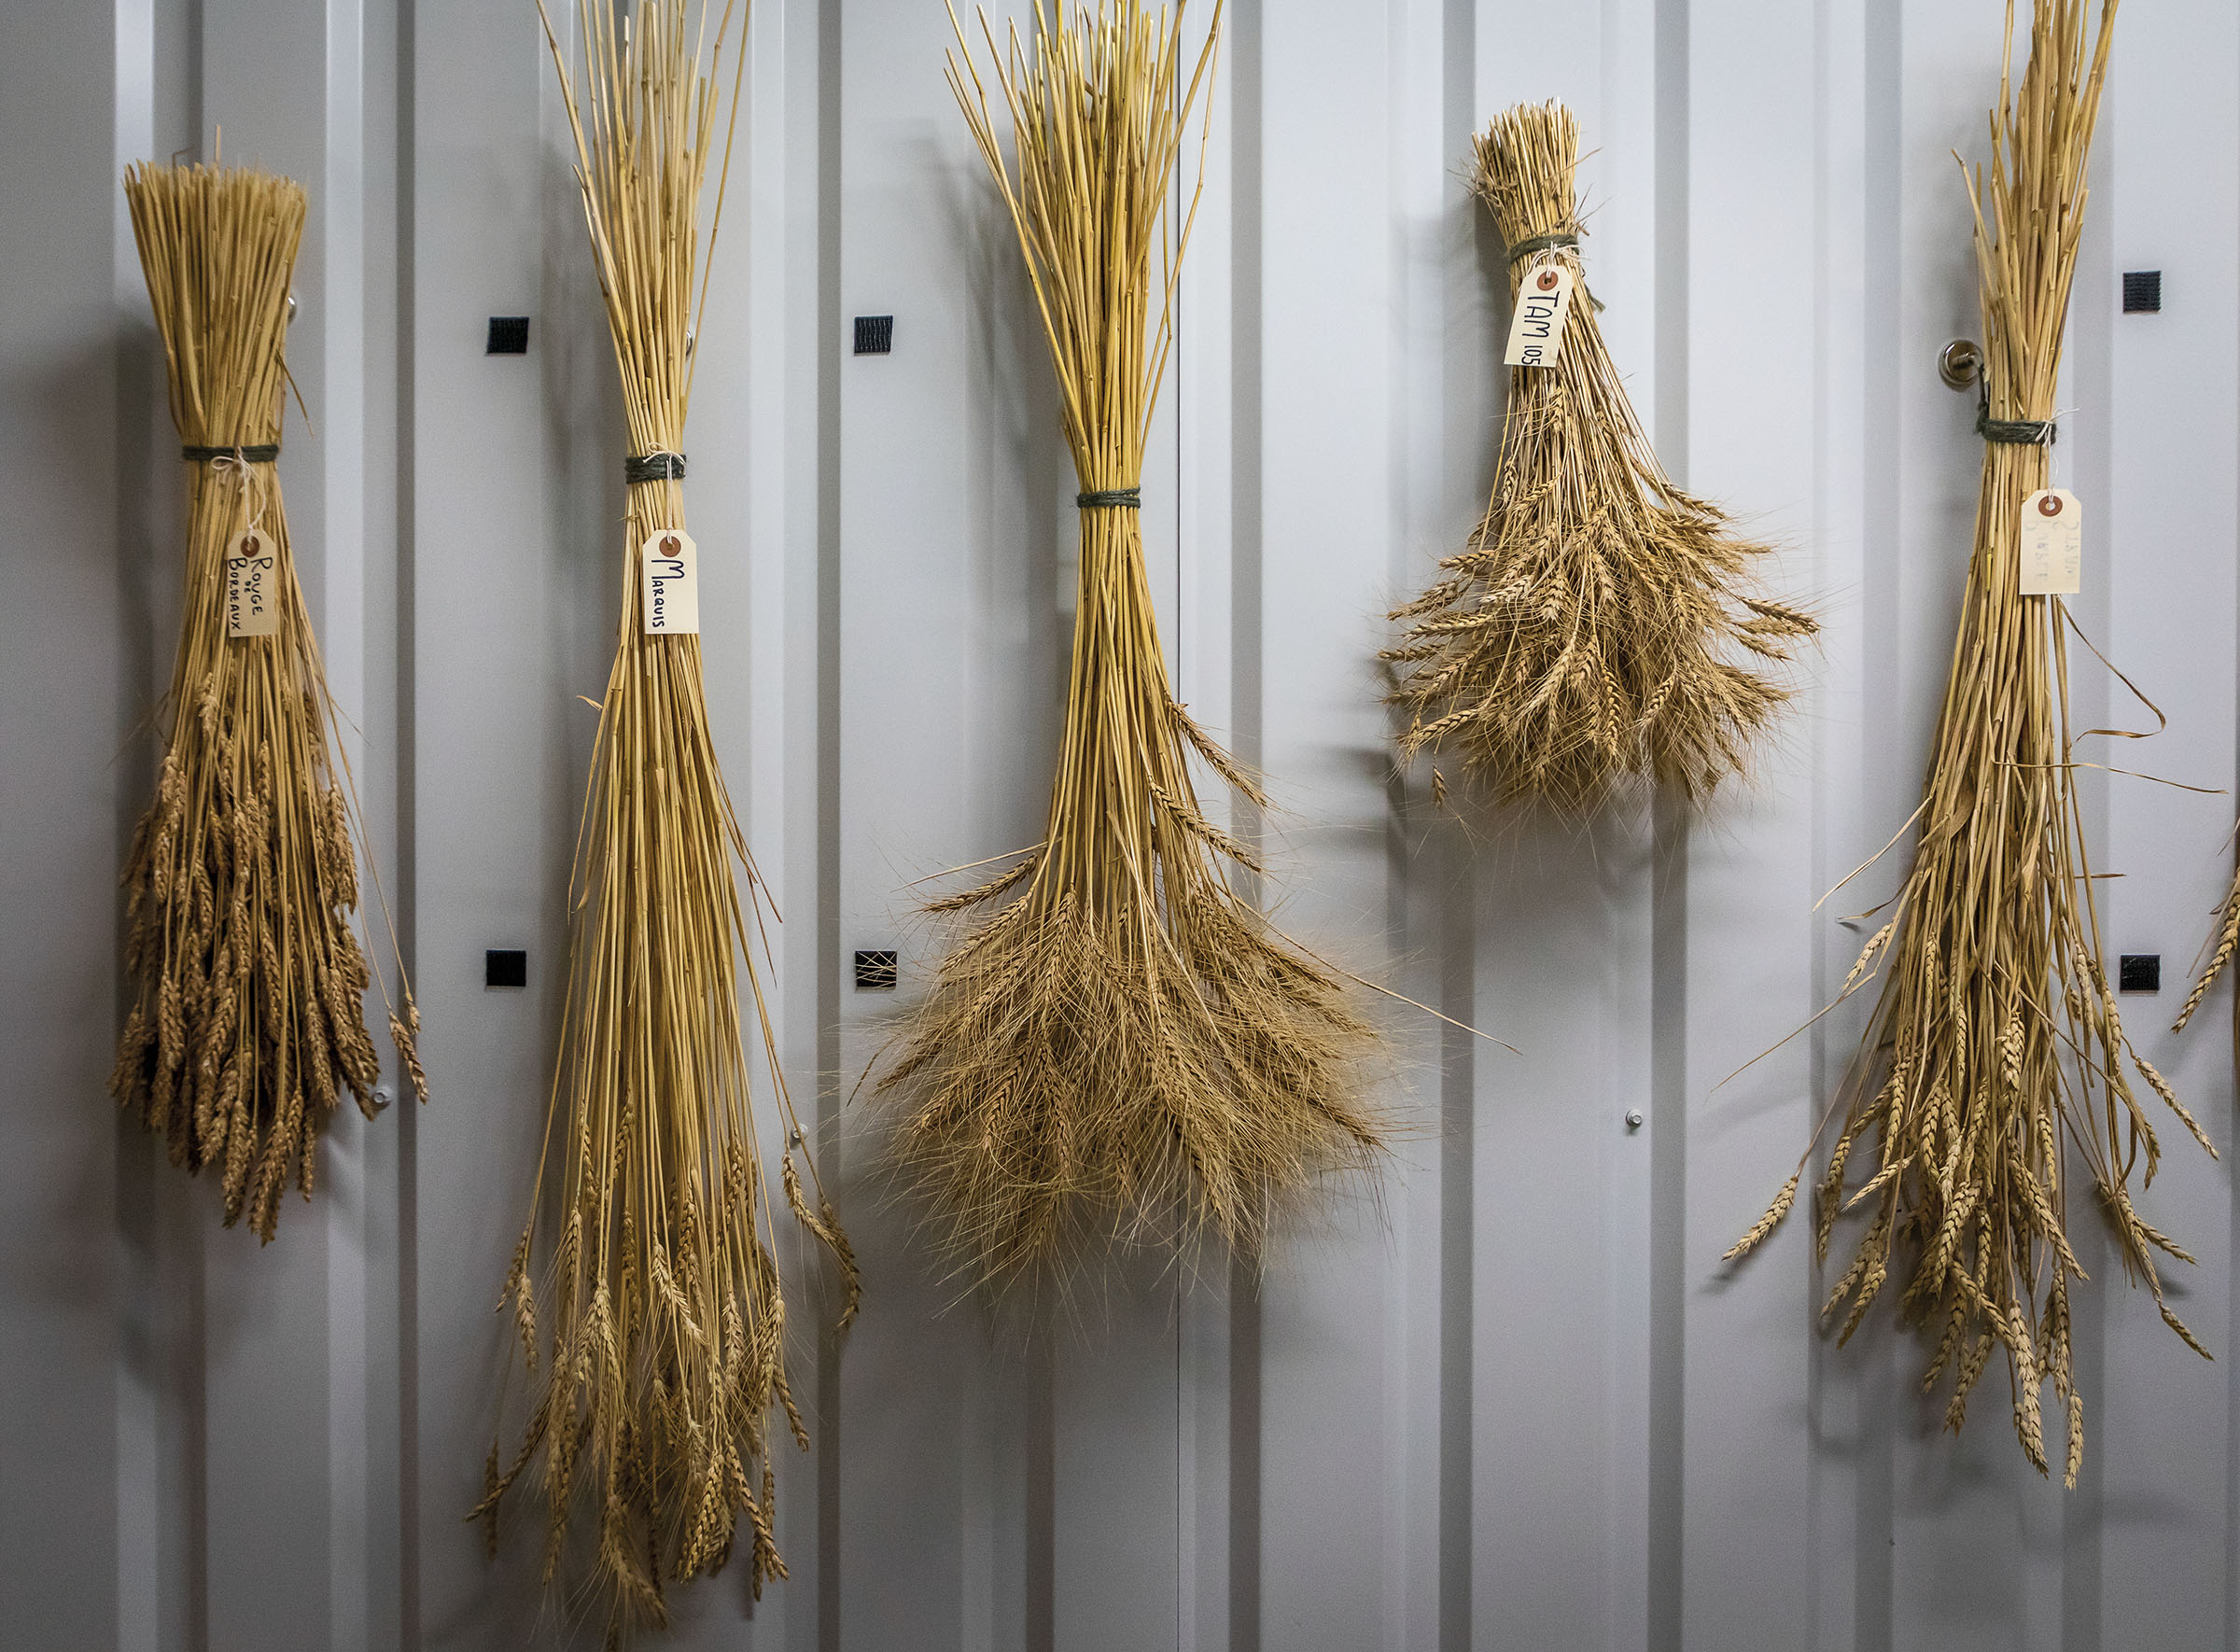 A few bundles of yellow grain hang from a white paneled wall